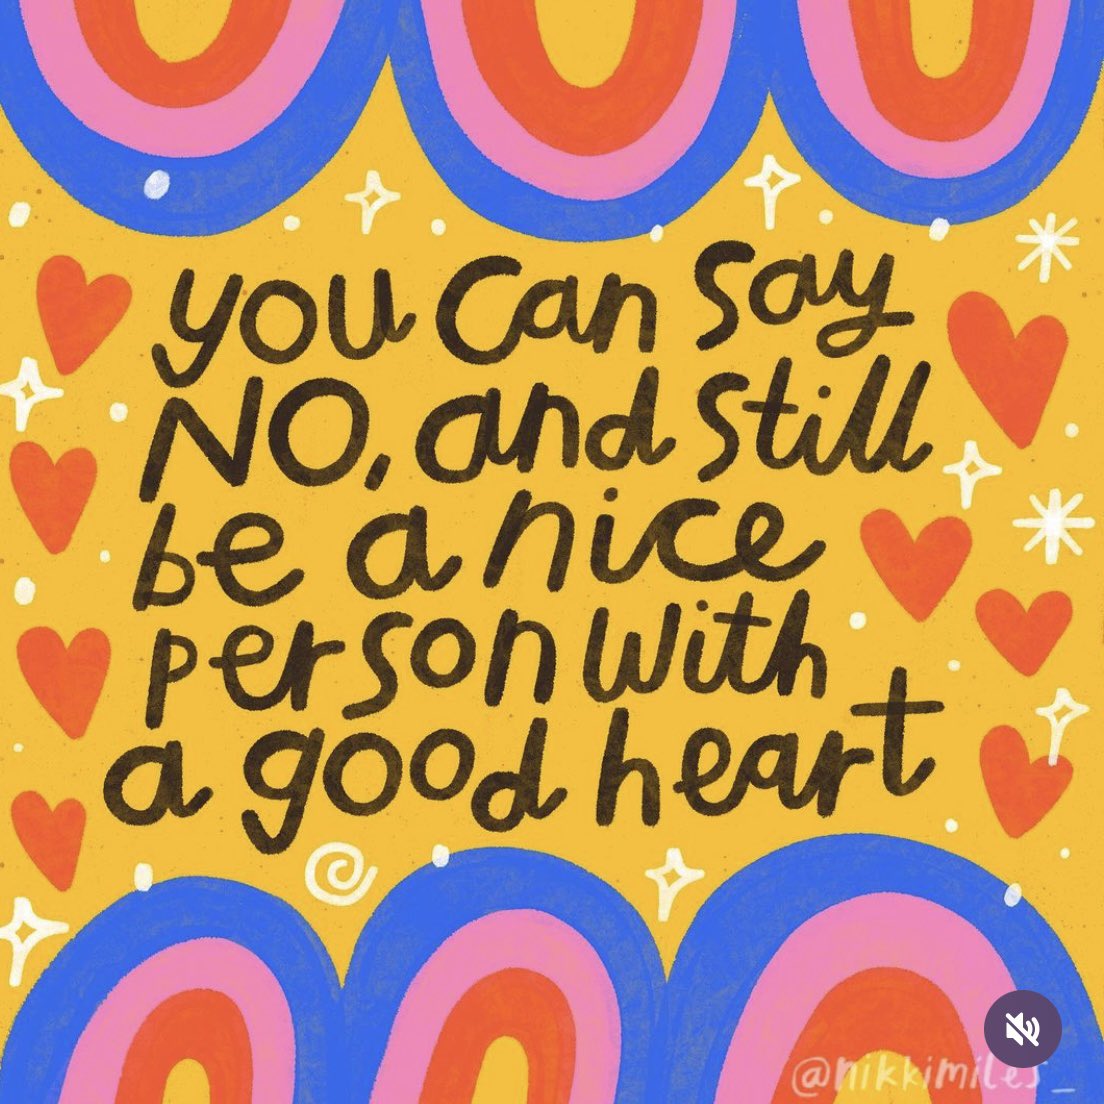 You can say No and still be a nice person with a good heart Image: instagram.com/nikkimiles_